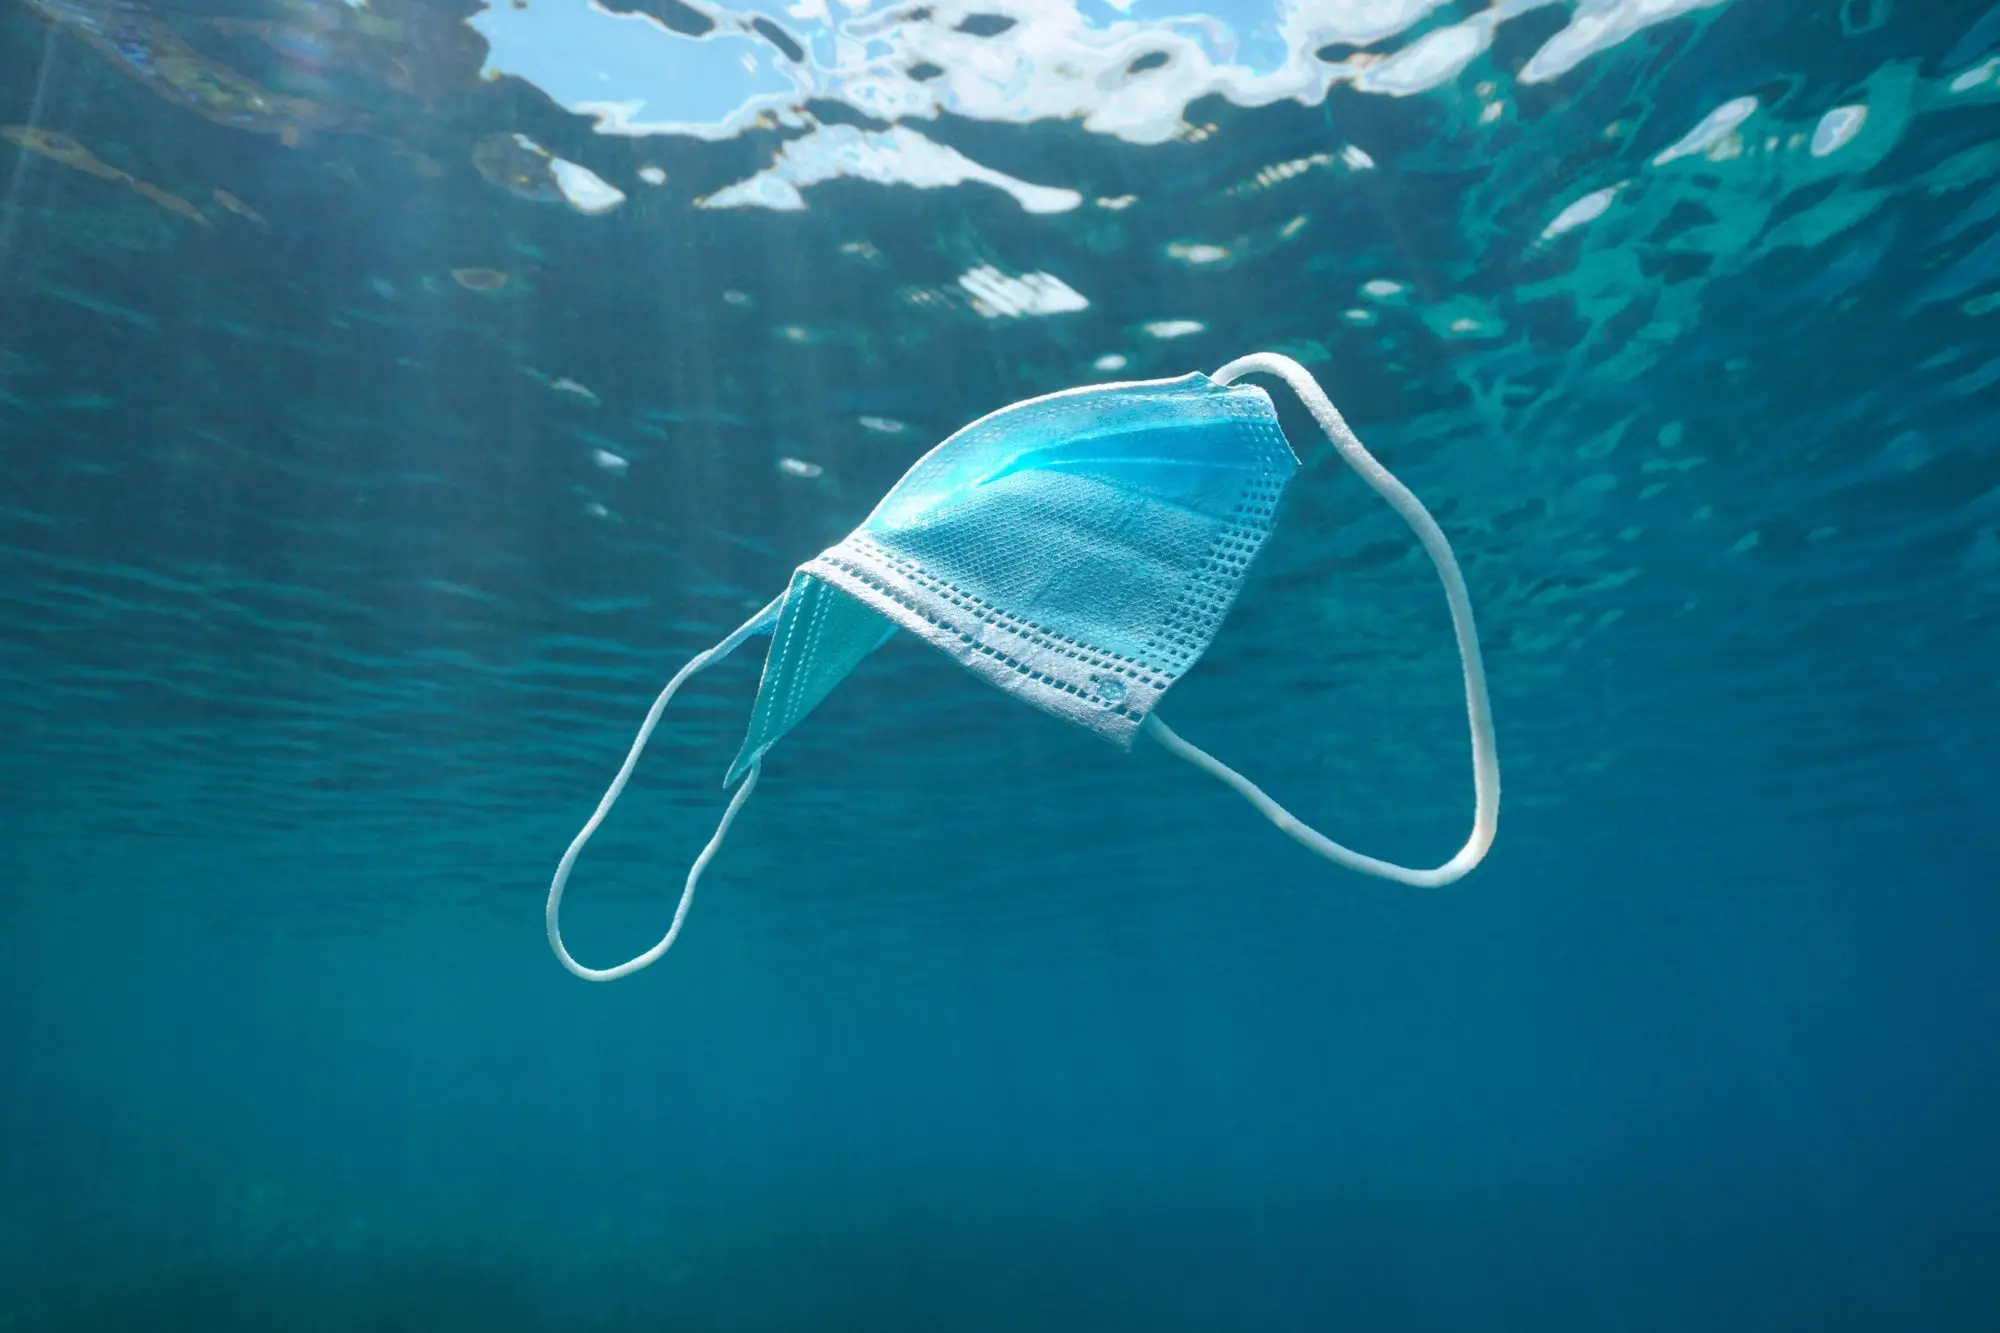 Disposable surgical face mask underwater, plastic waste in the ocean since coronavirus COVID-19 pandemic.